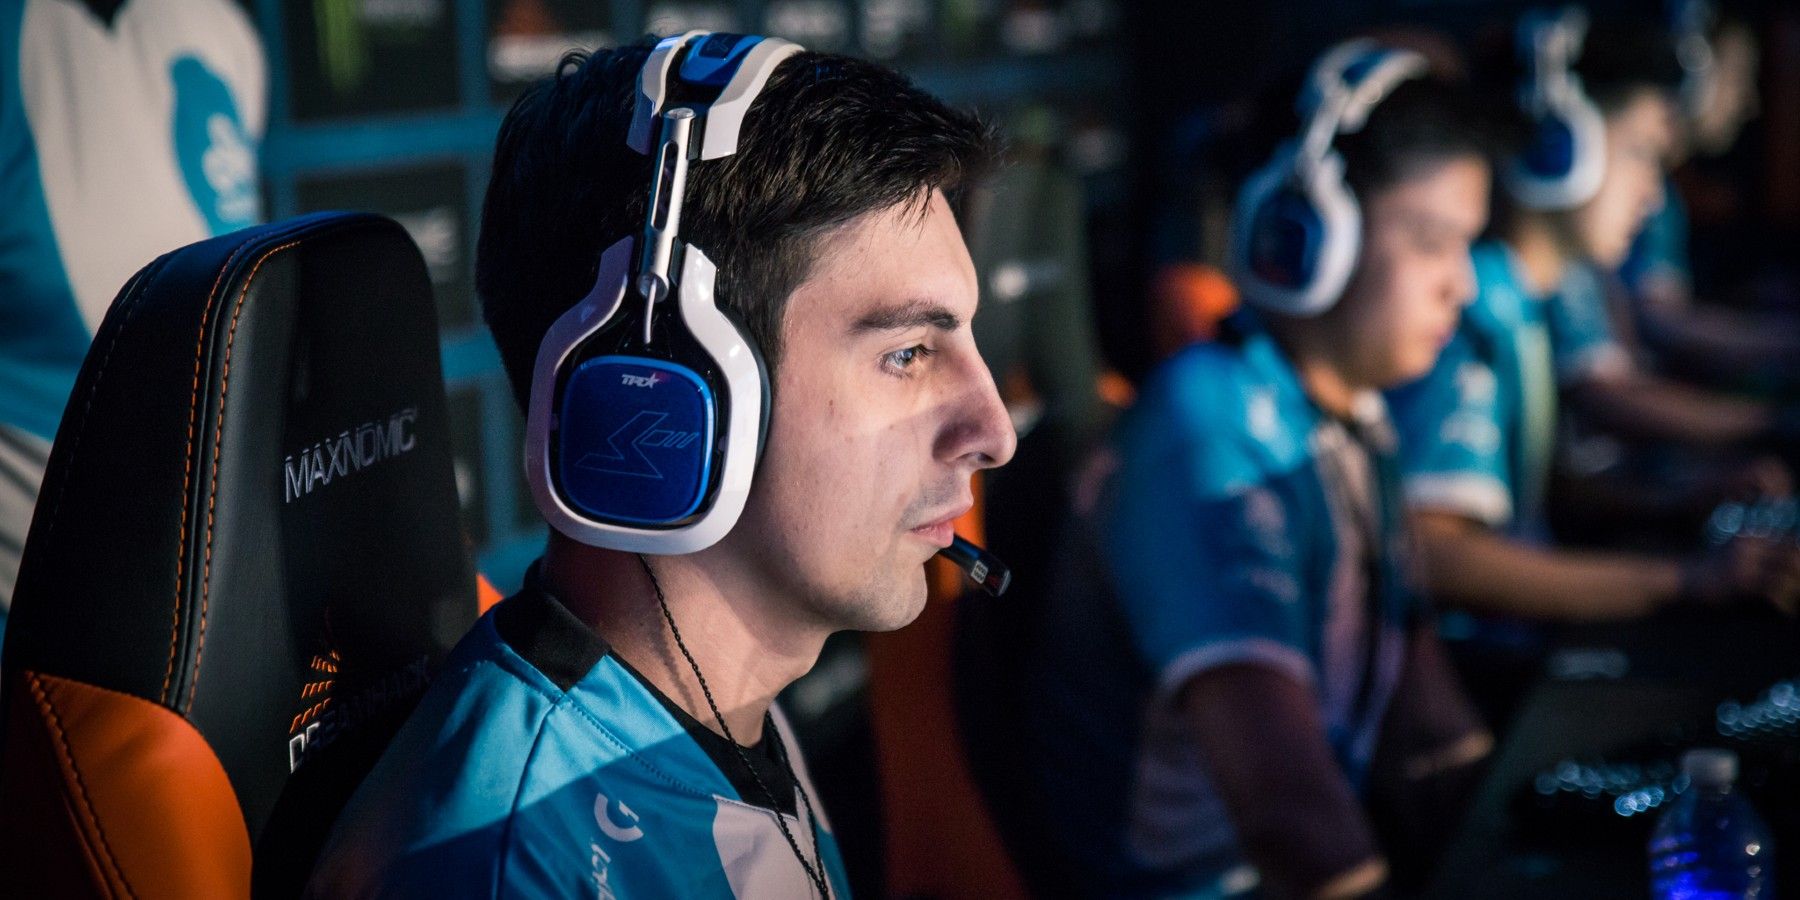 Twitch Streamer Shroud Explains Why He Won't Play Games Competitively